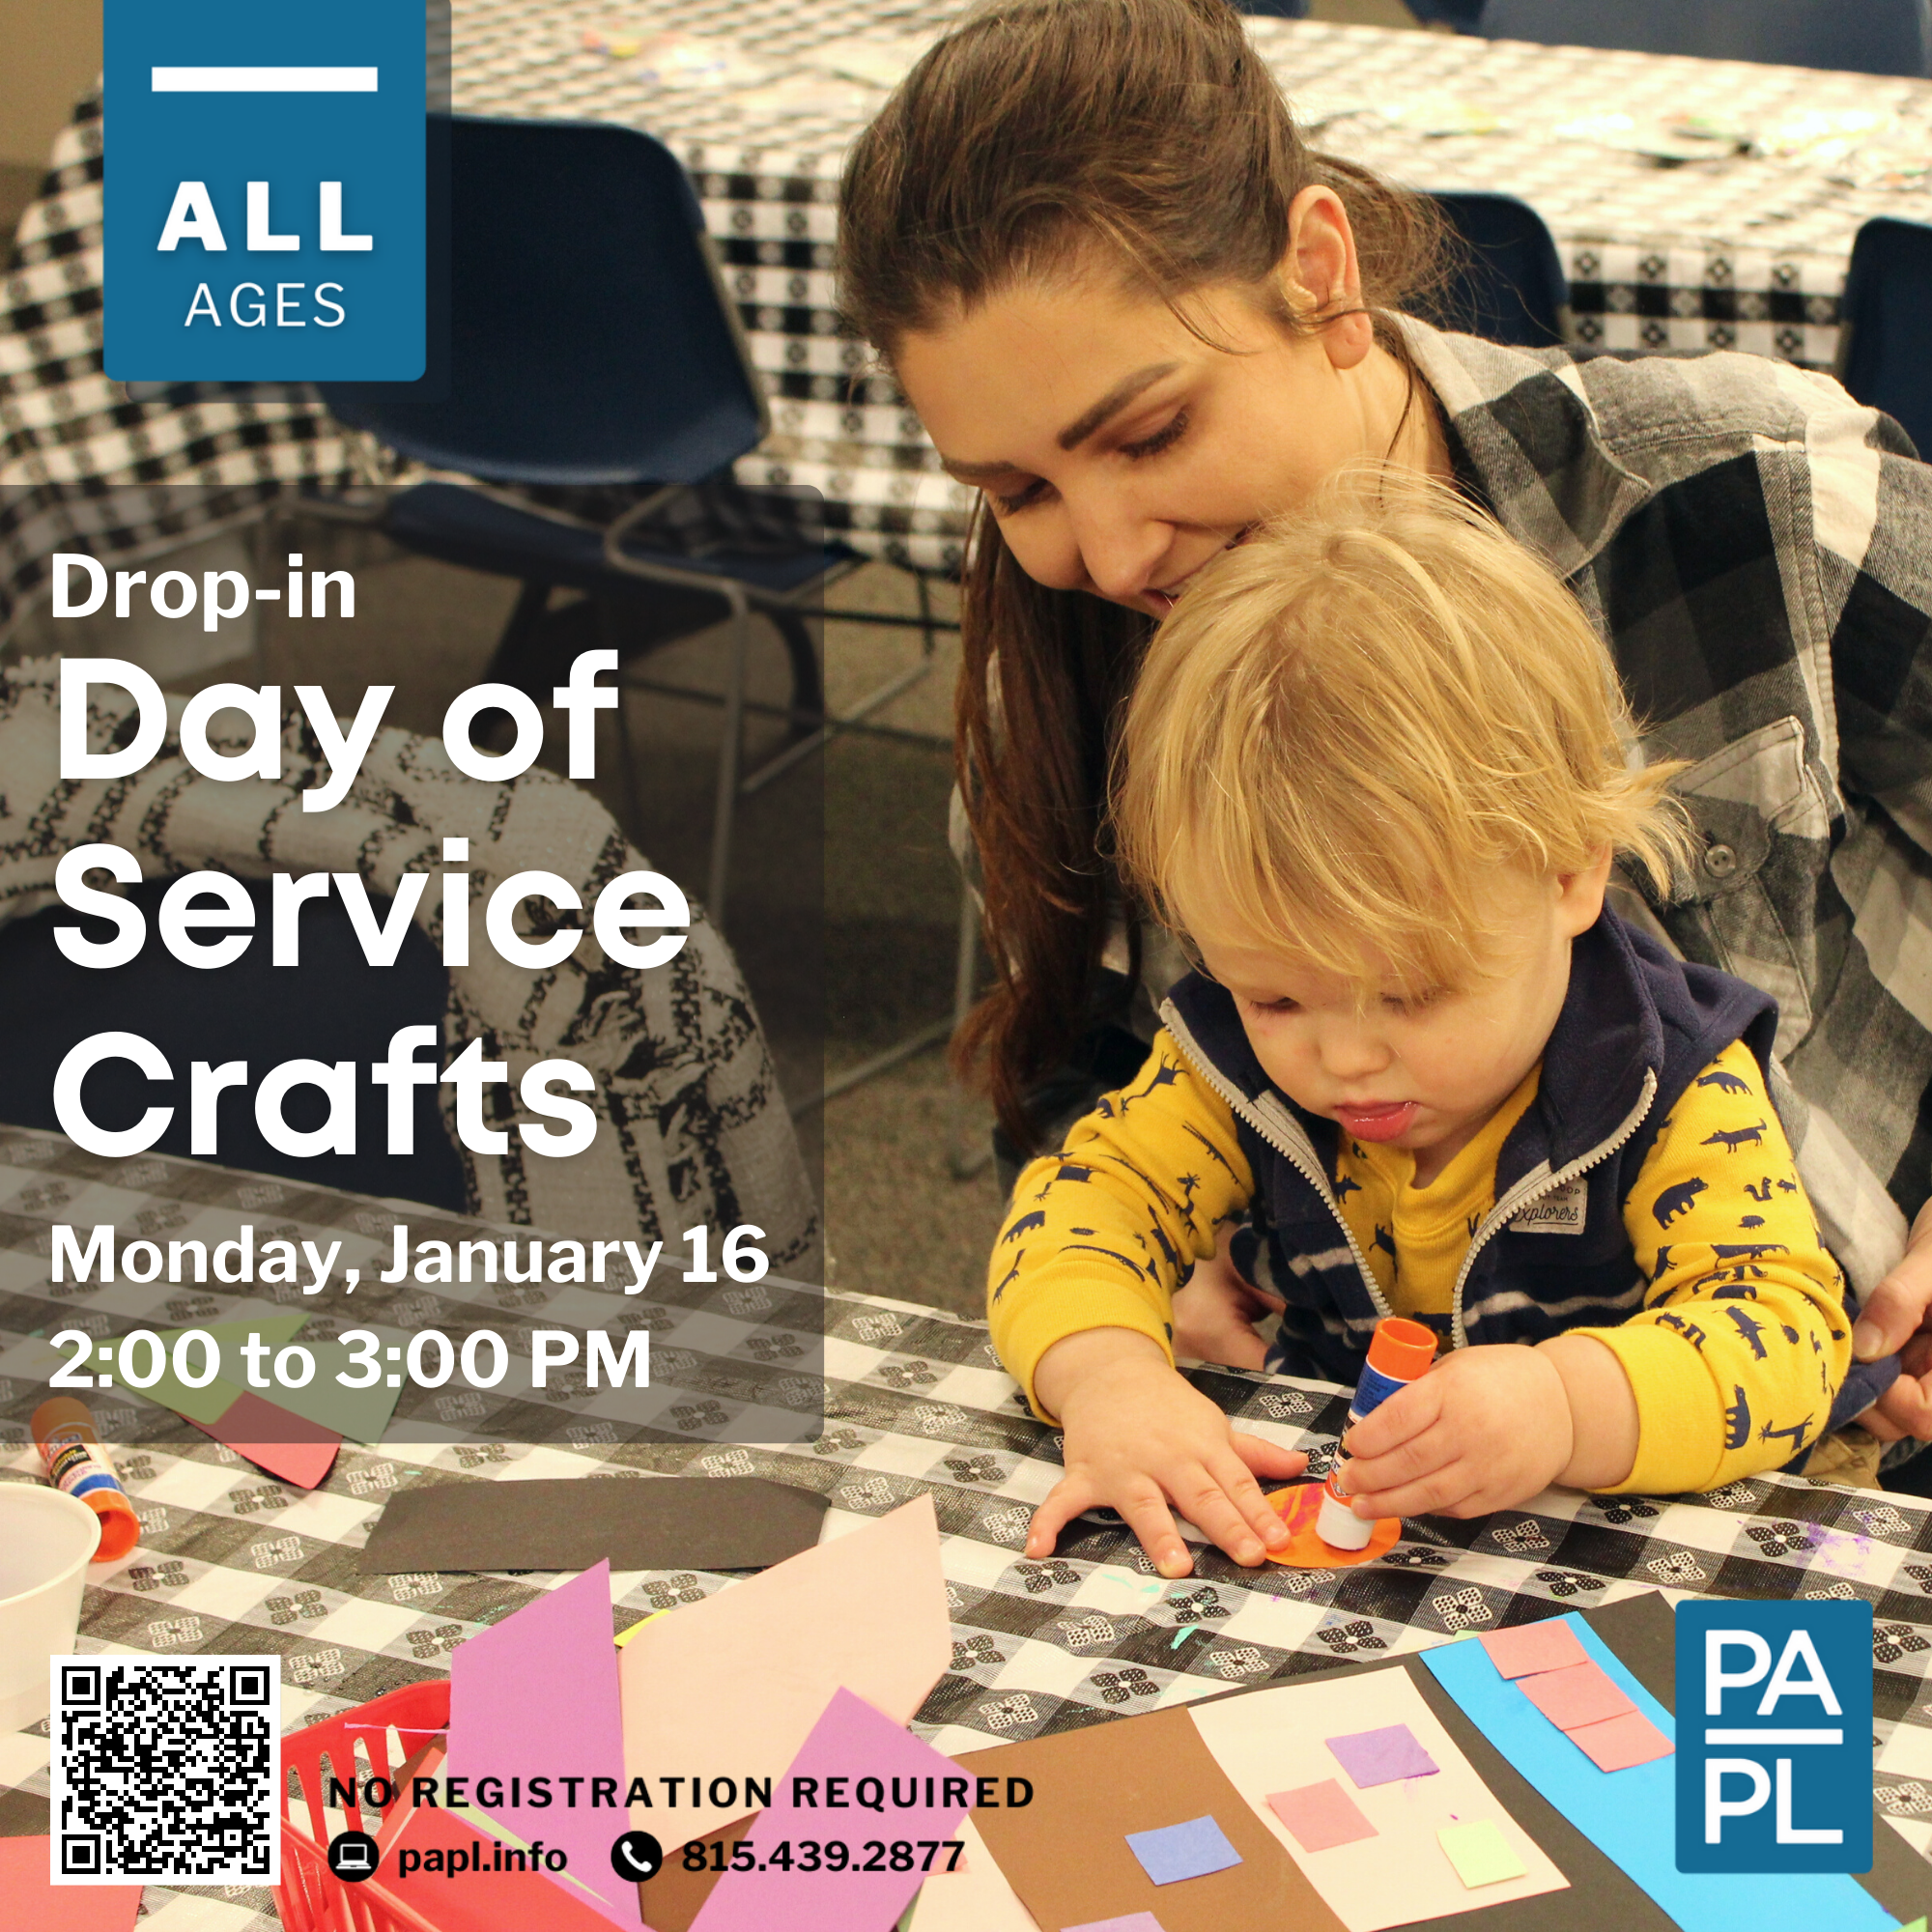 Drop-in Day of Service Crafts